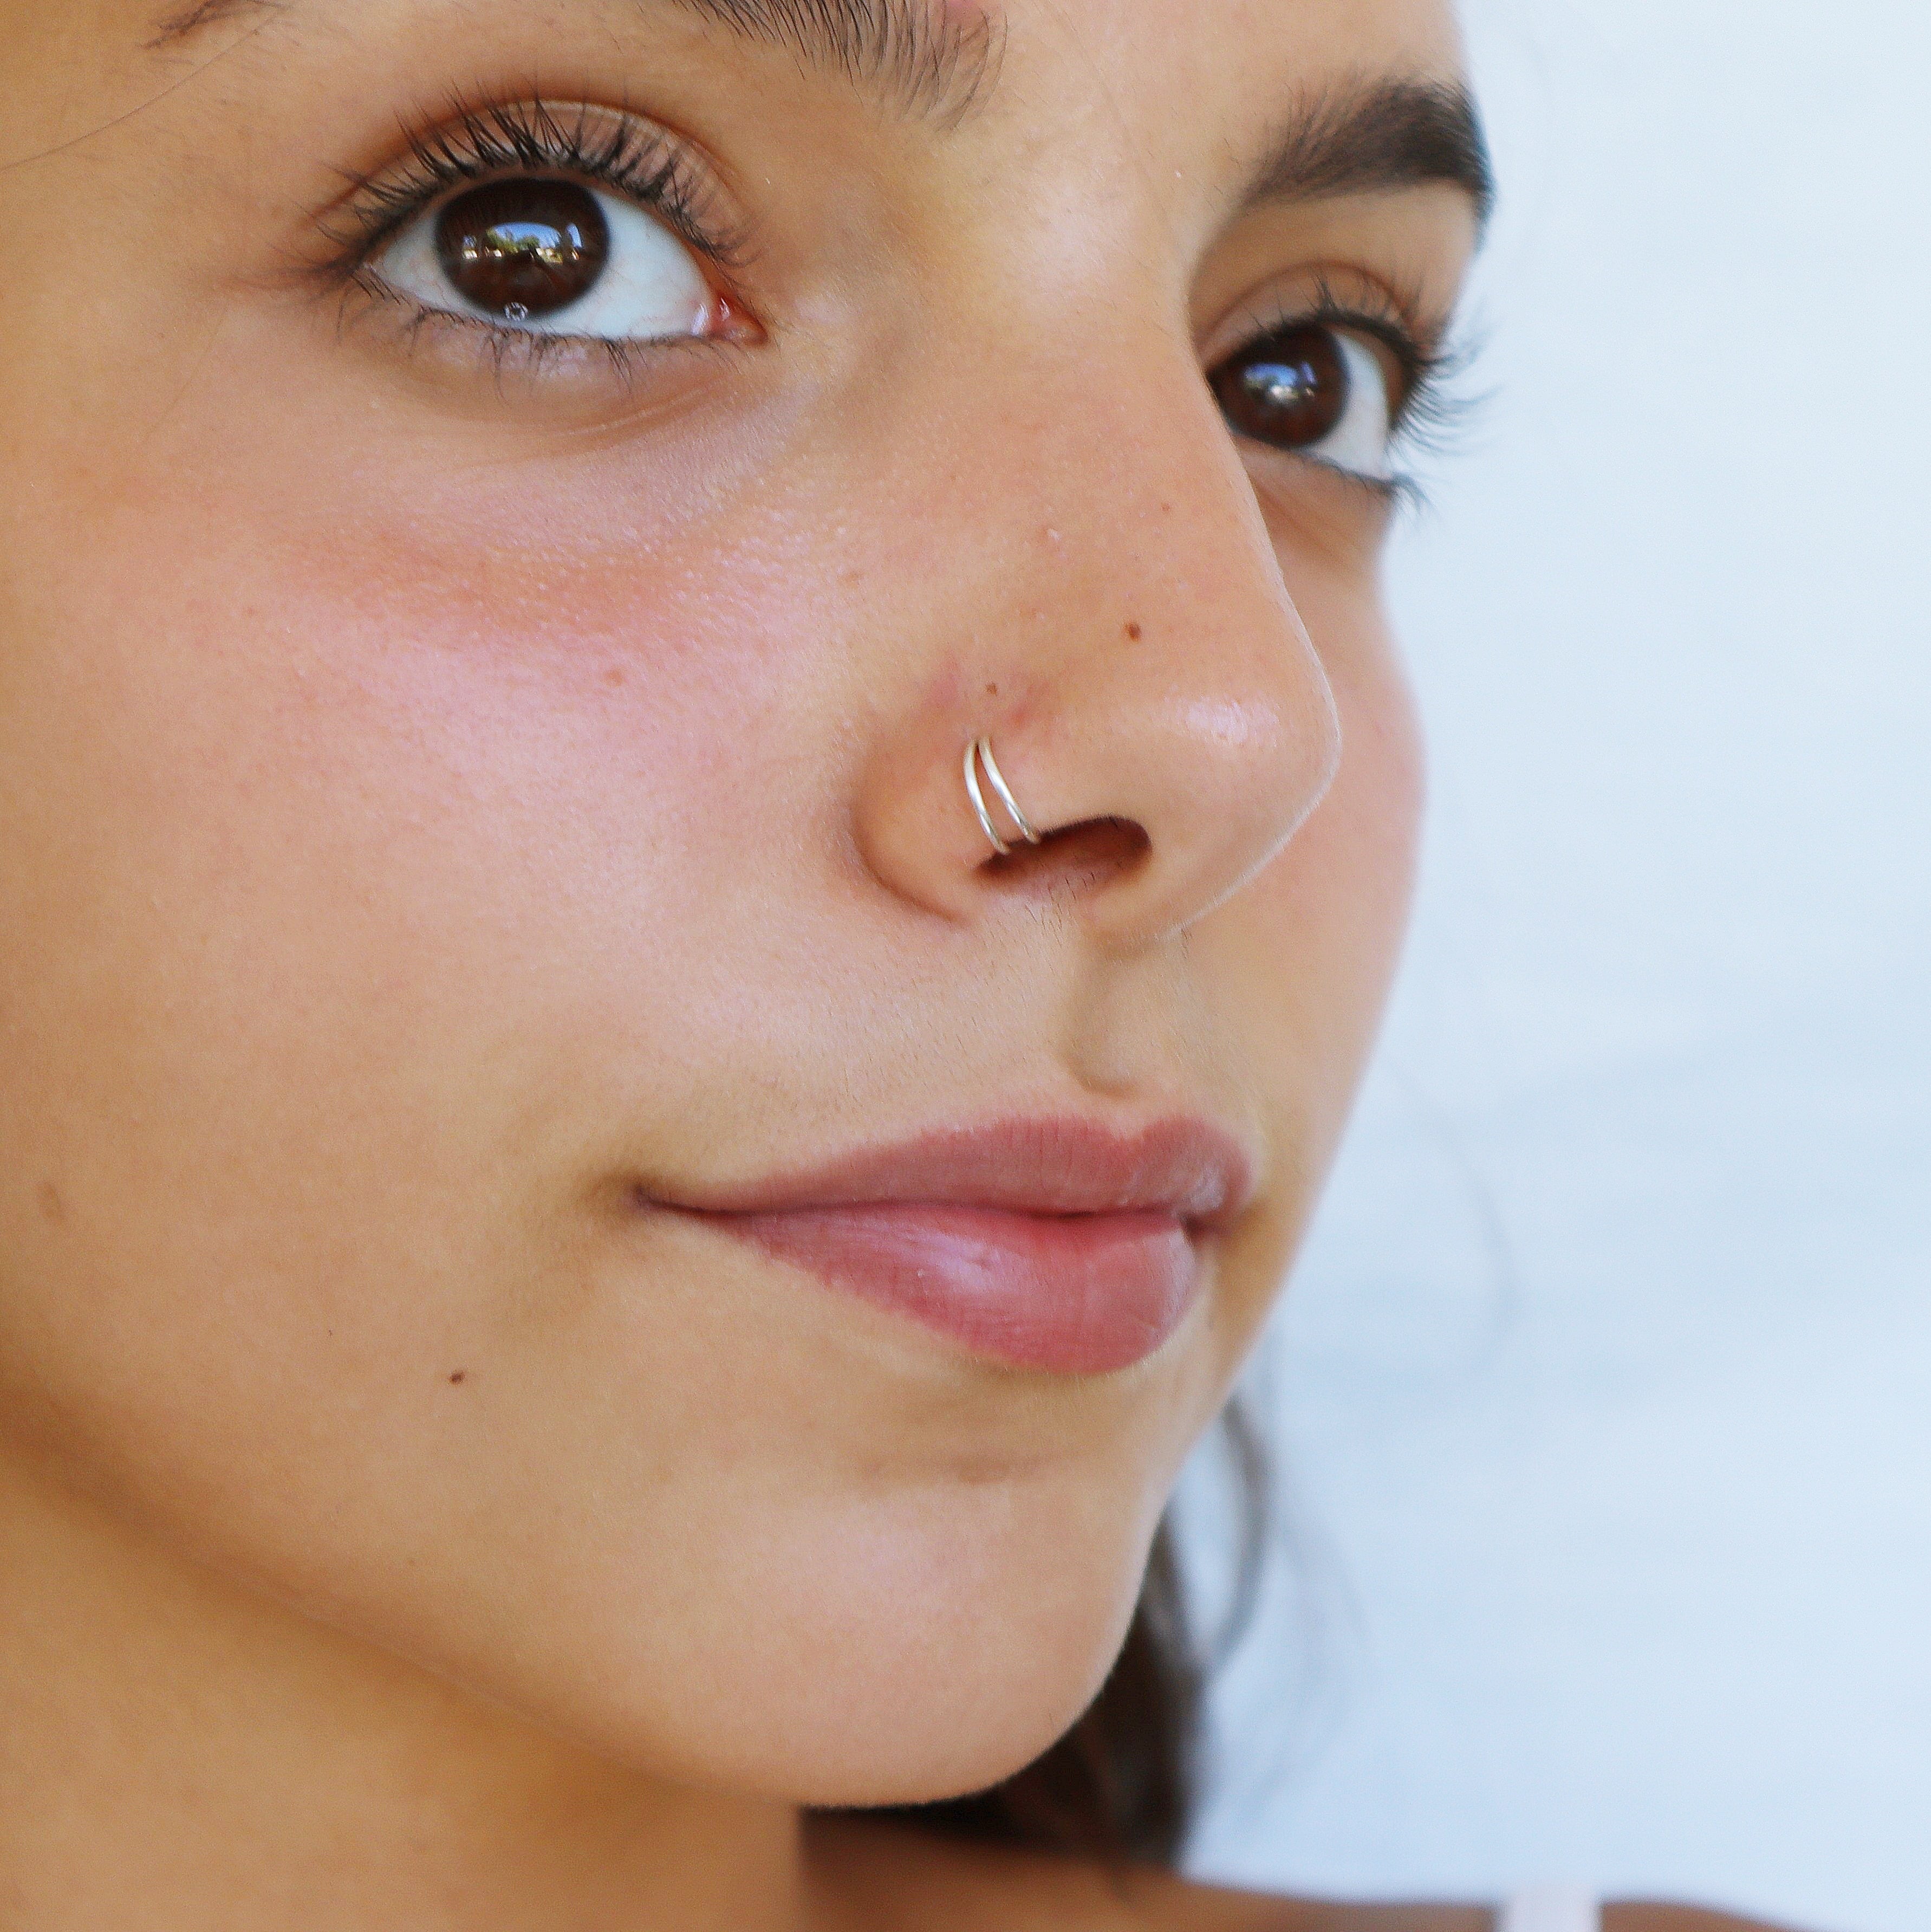 When Can I Change My Nose Ring? - AuthorityTattoo